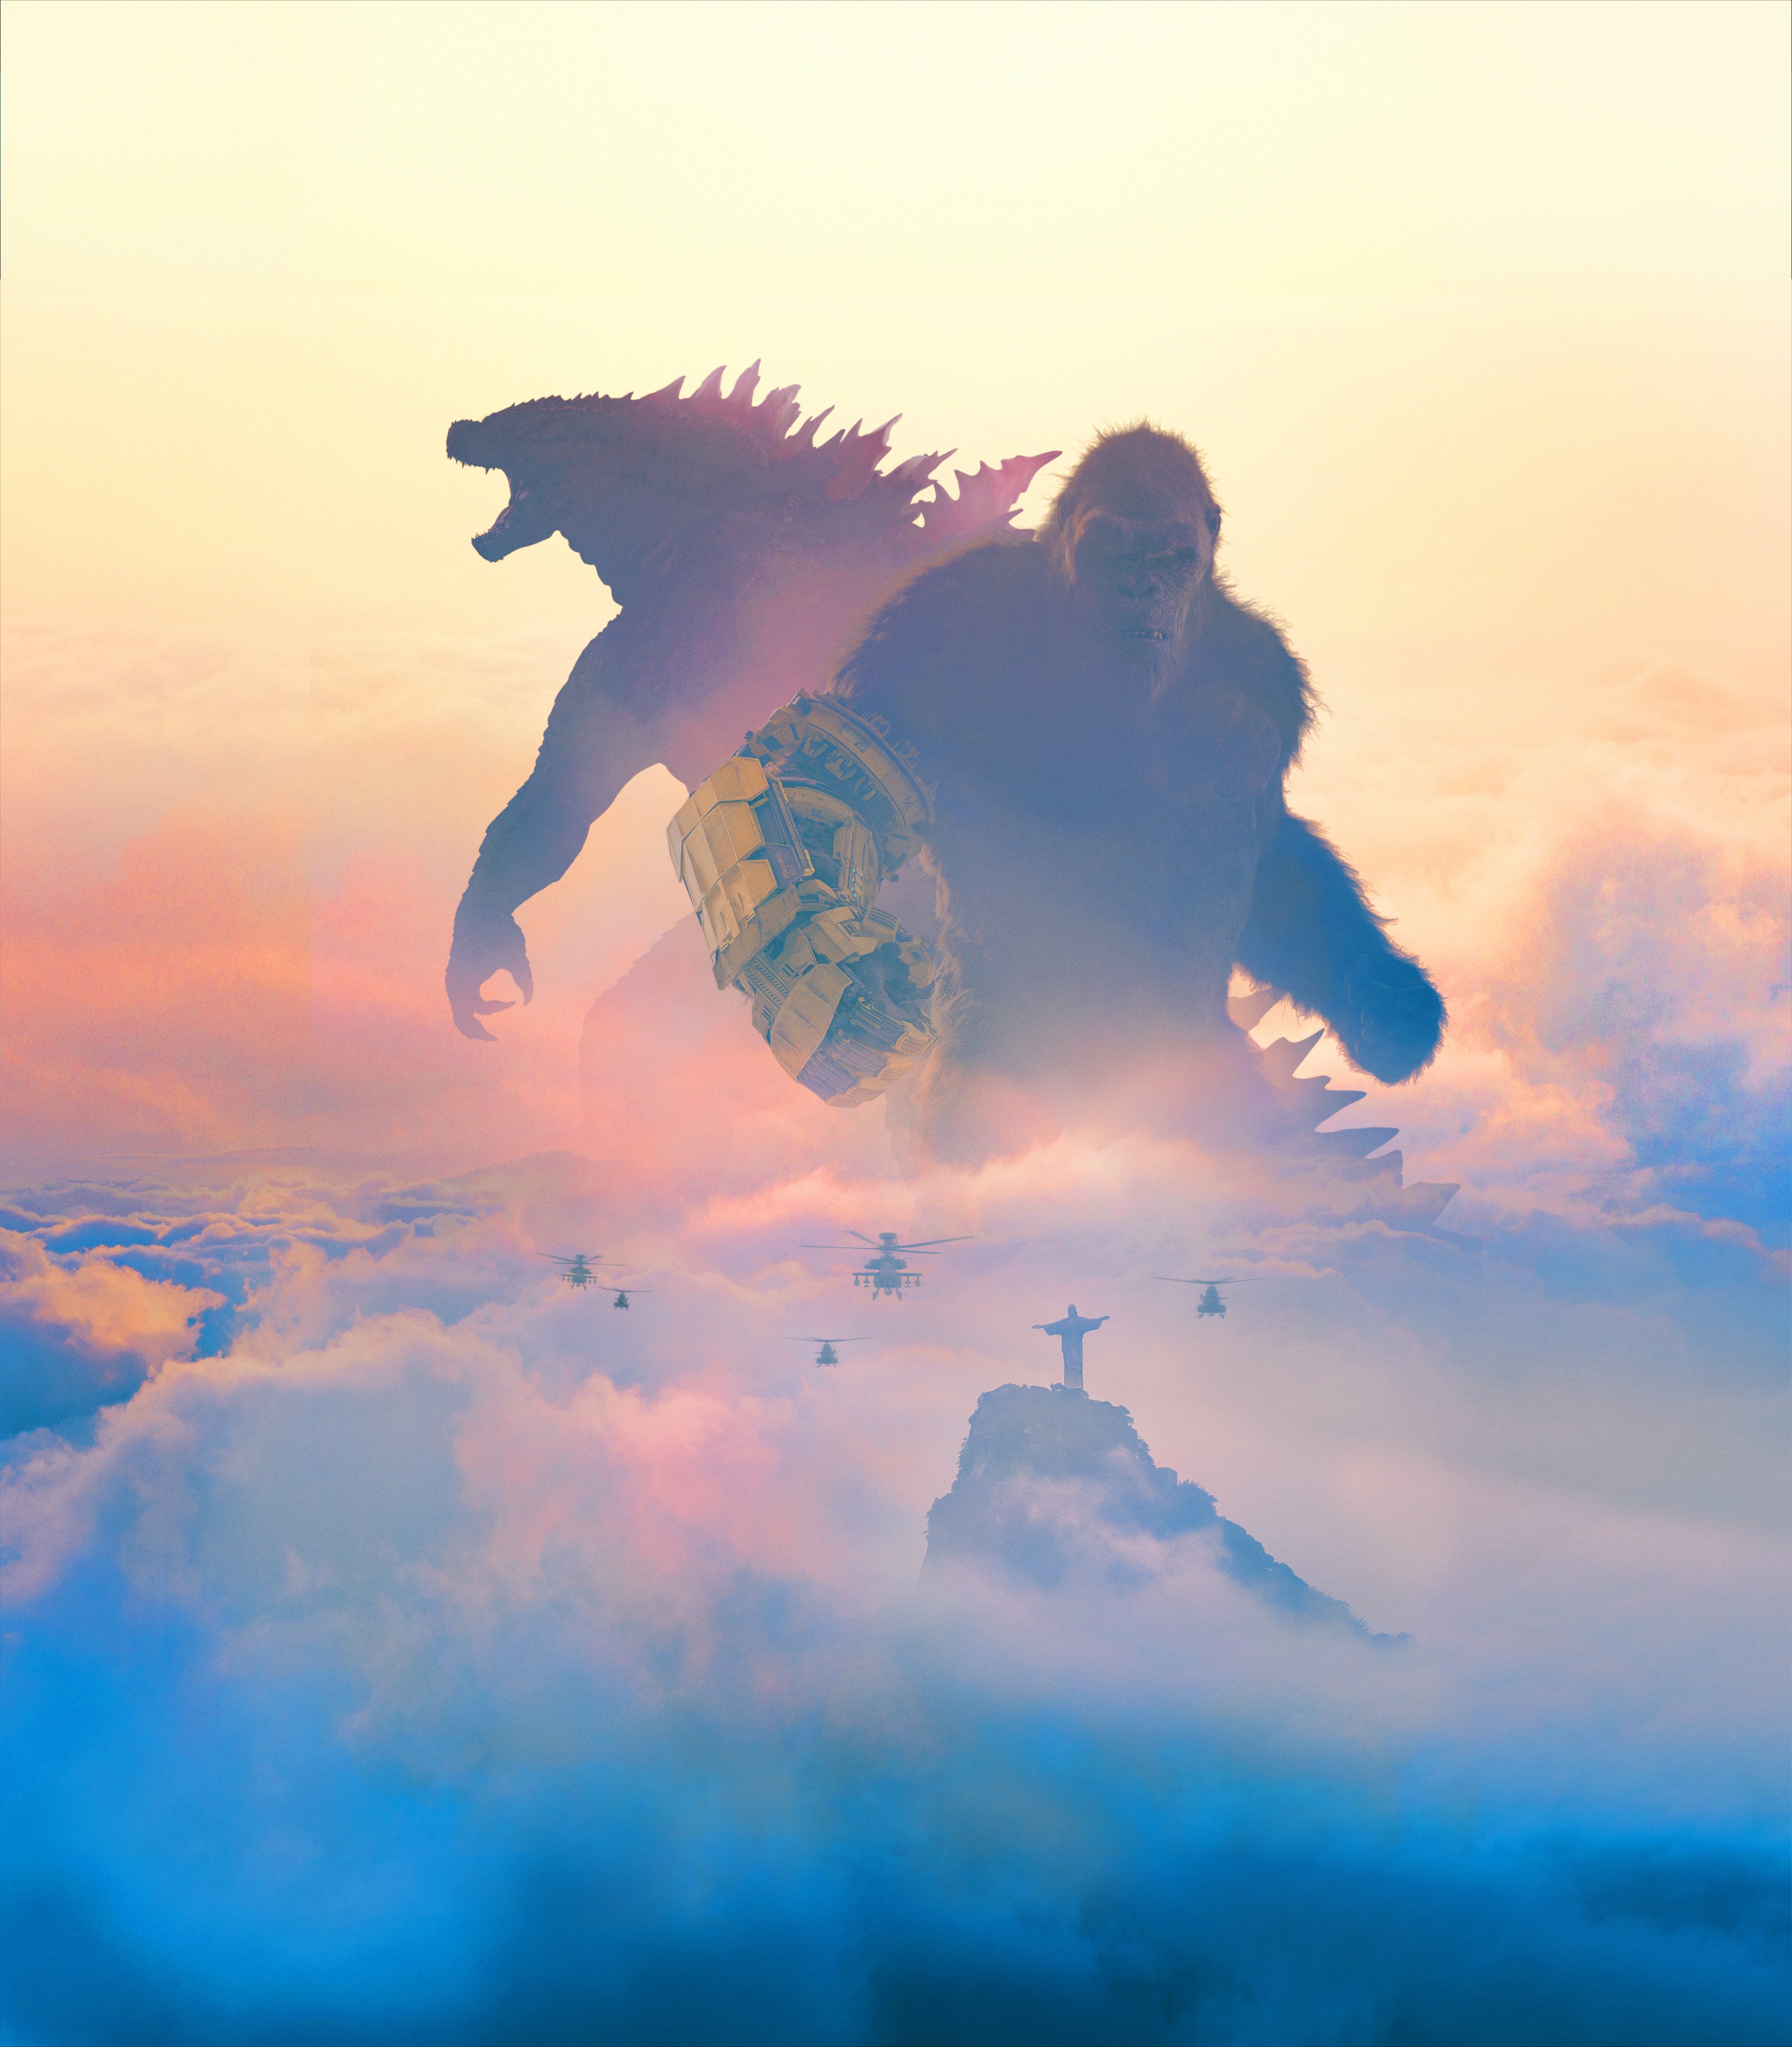 Textless Poster for Godzilla x Kong